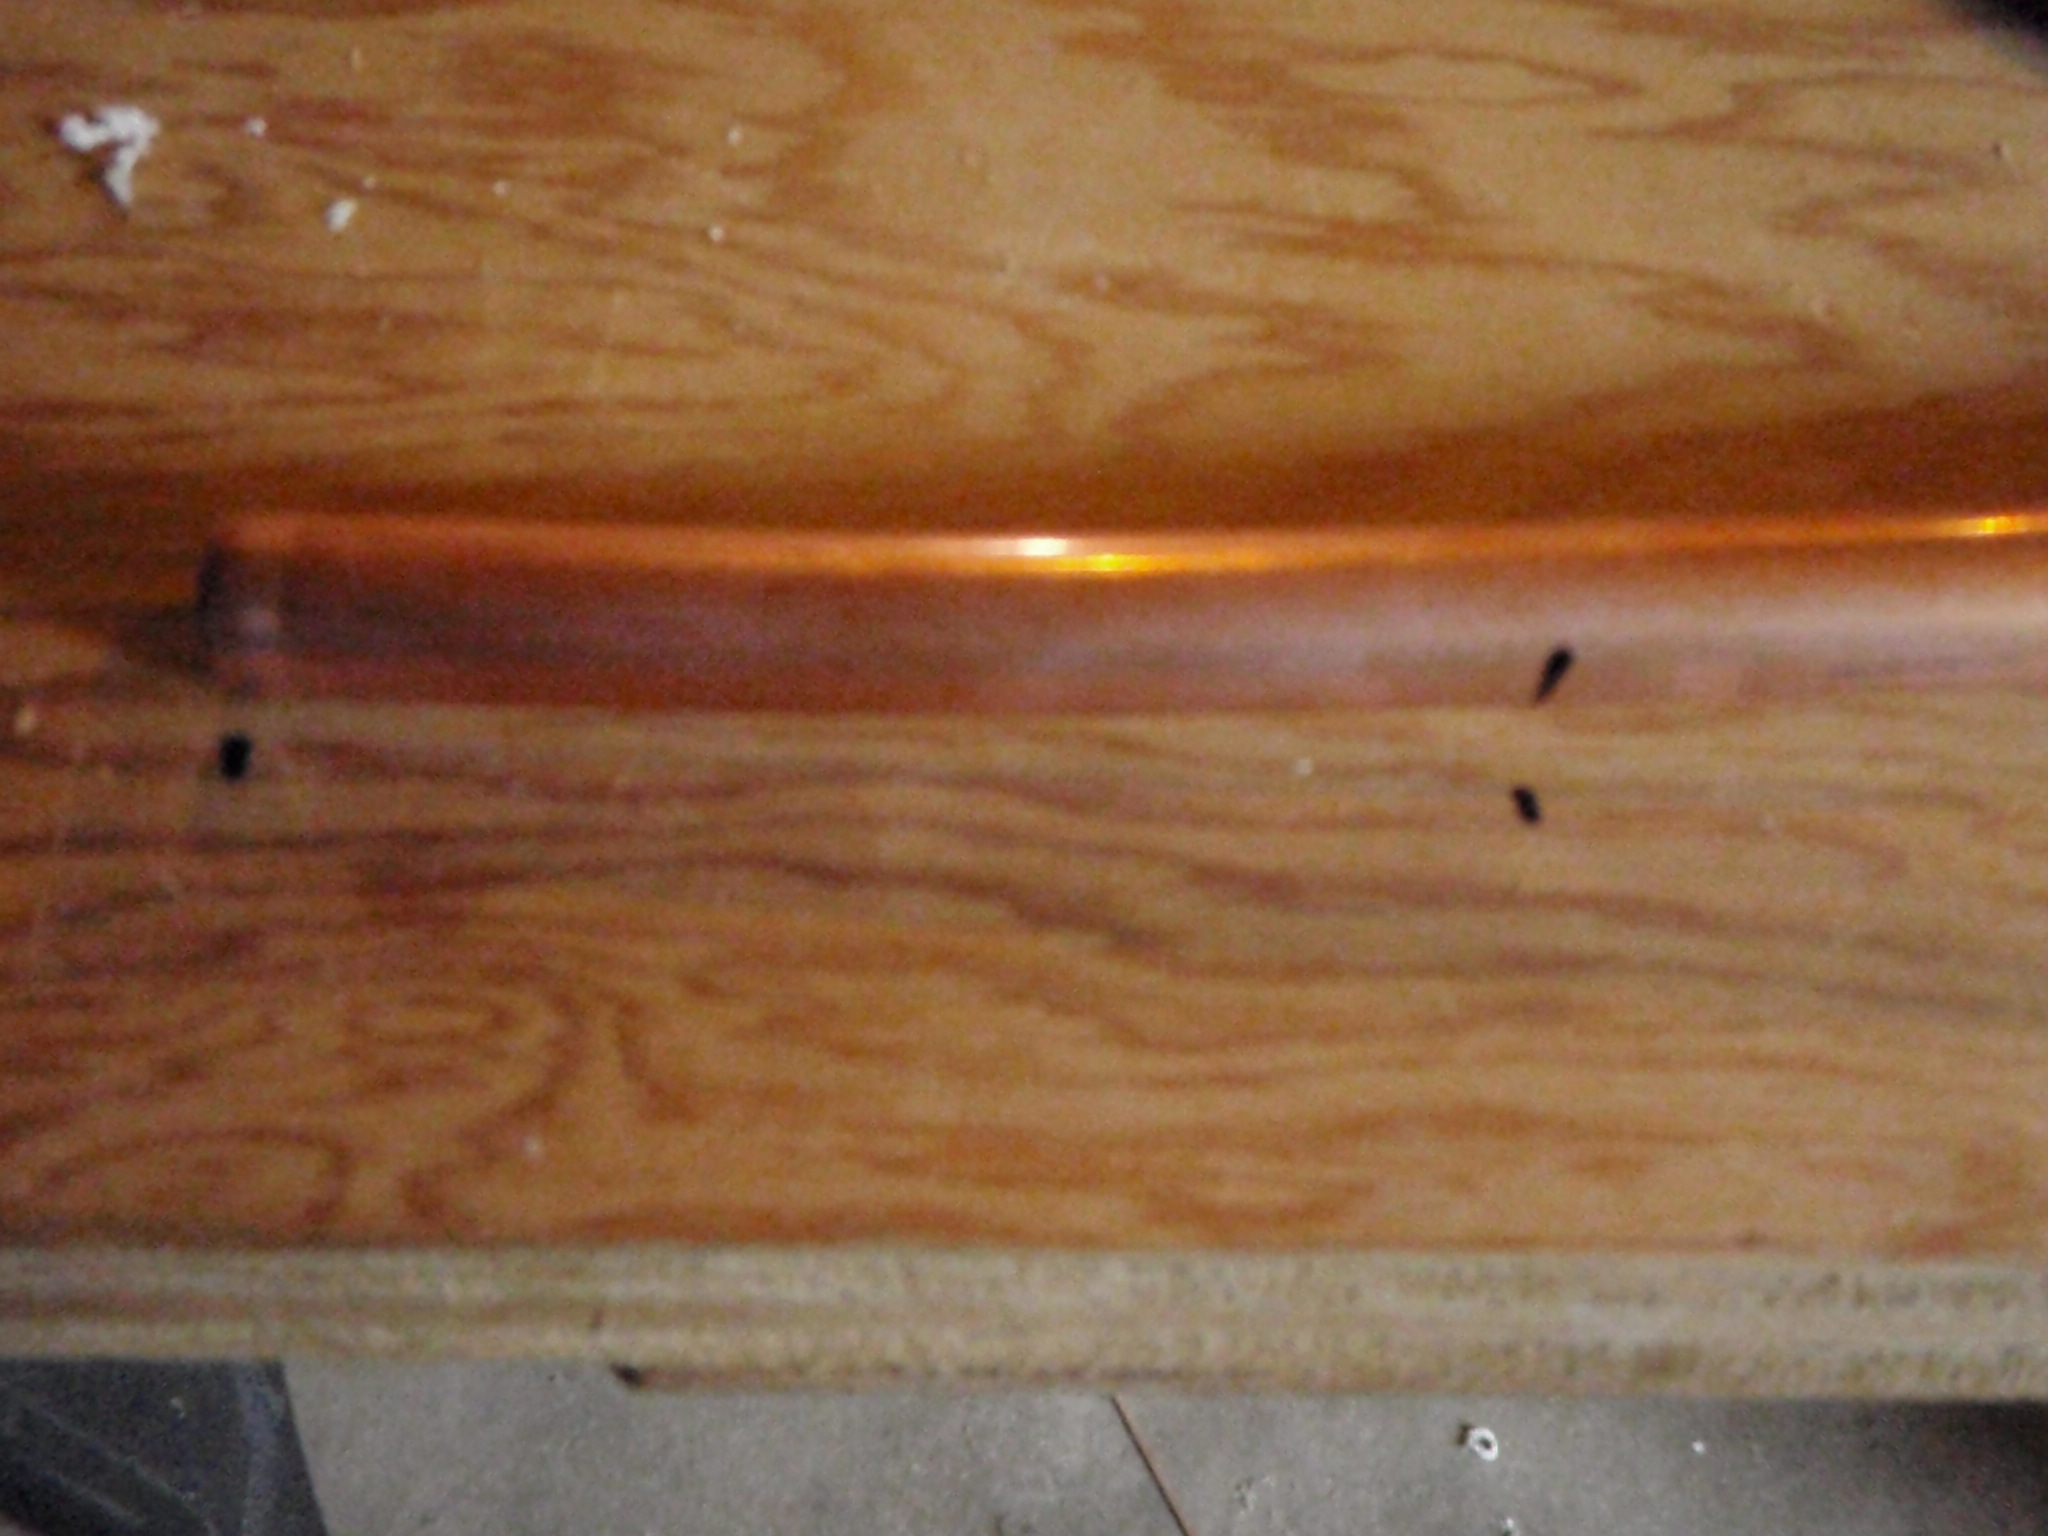 Marking the copper tubing